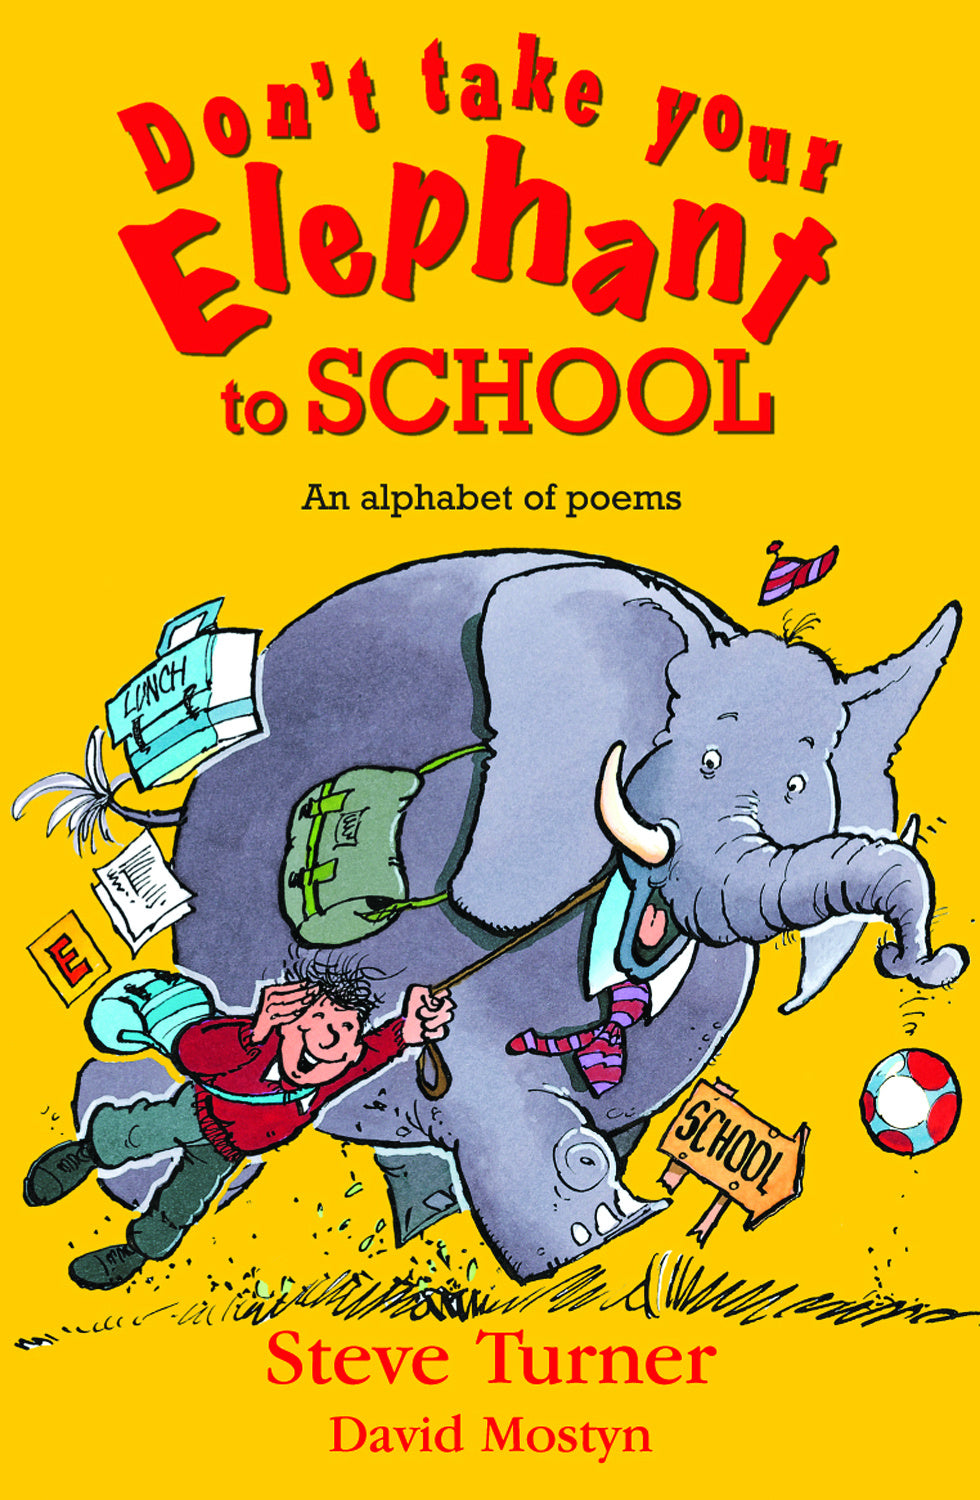 Image of Don't Take Your Elephant to School other